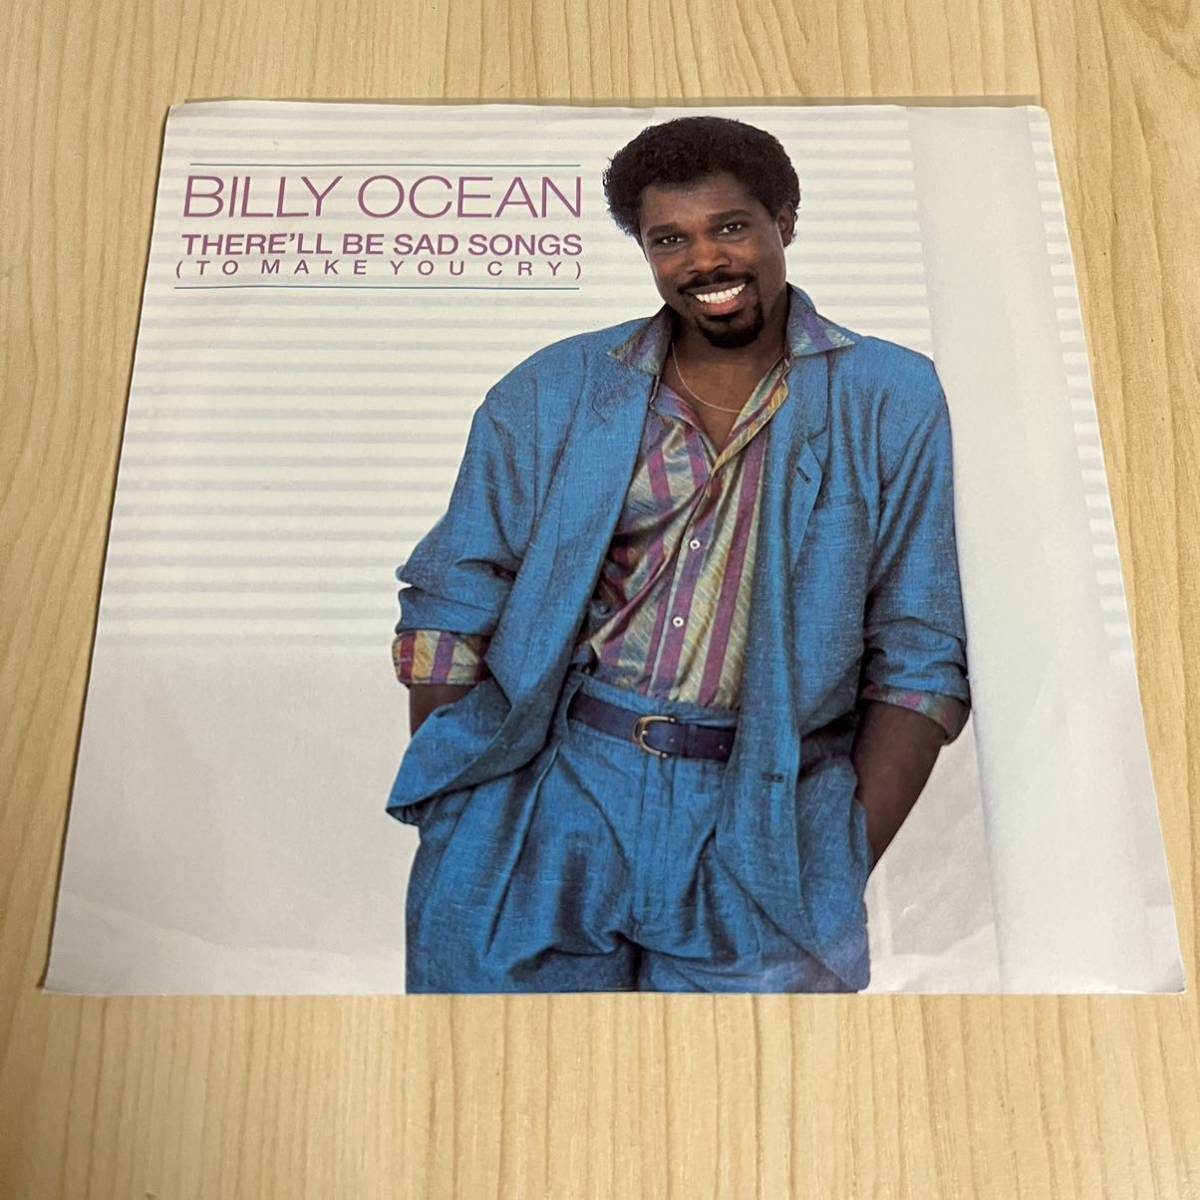 【US盤7inch】BILLY OCEAN THERE`LL BE SAD SONG (TO MAKE YOUR CRY) IF I SHOULD LOSE YOU ビリーオーシャン/EP レコード/JS1-9465/ソウル_画像1